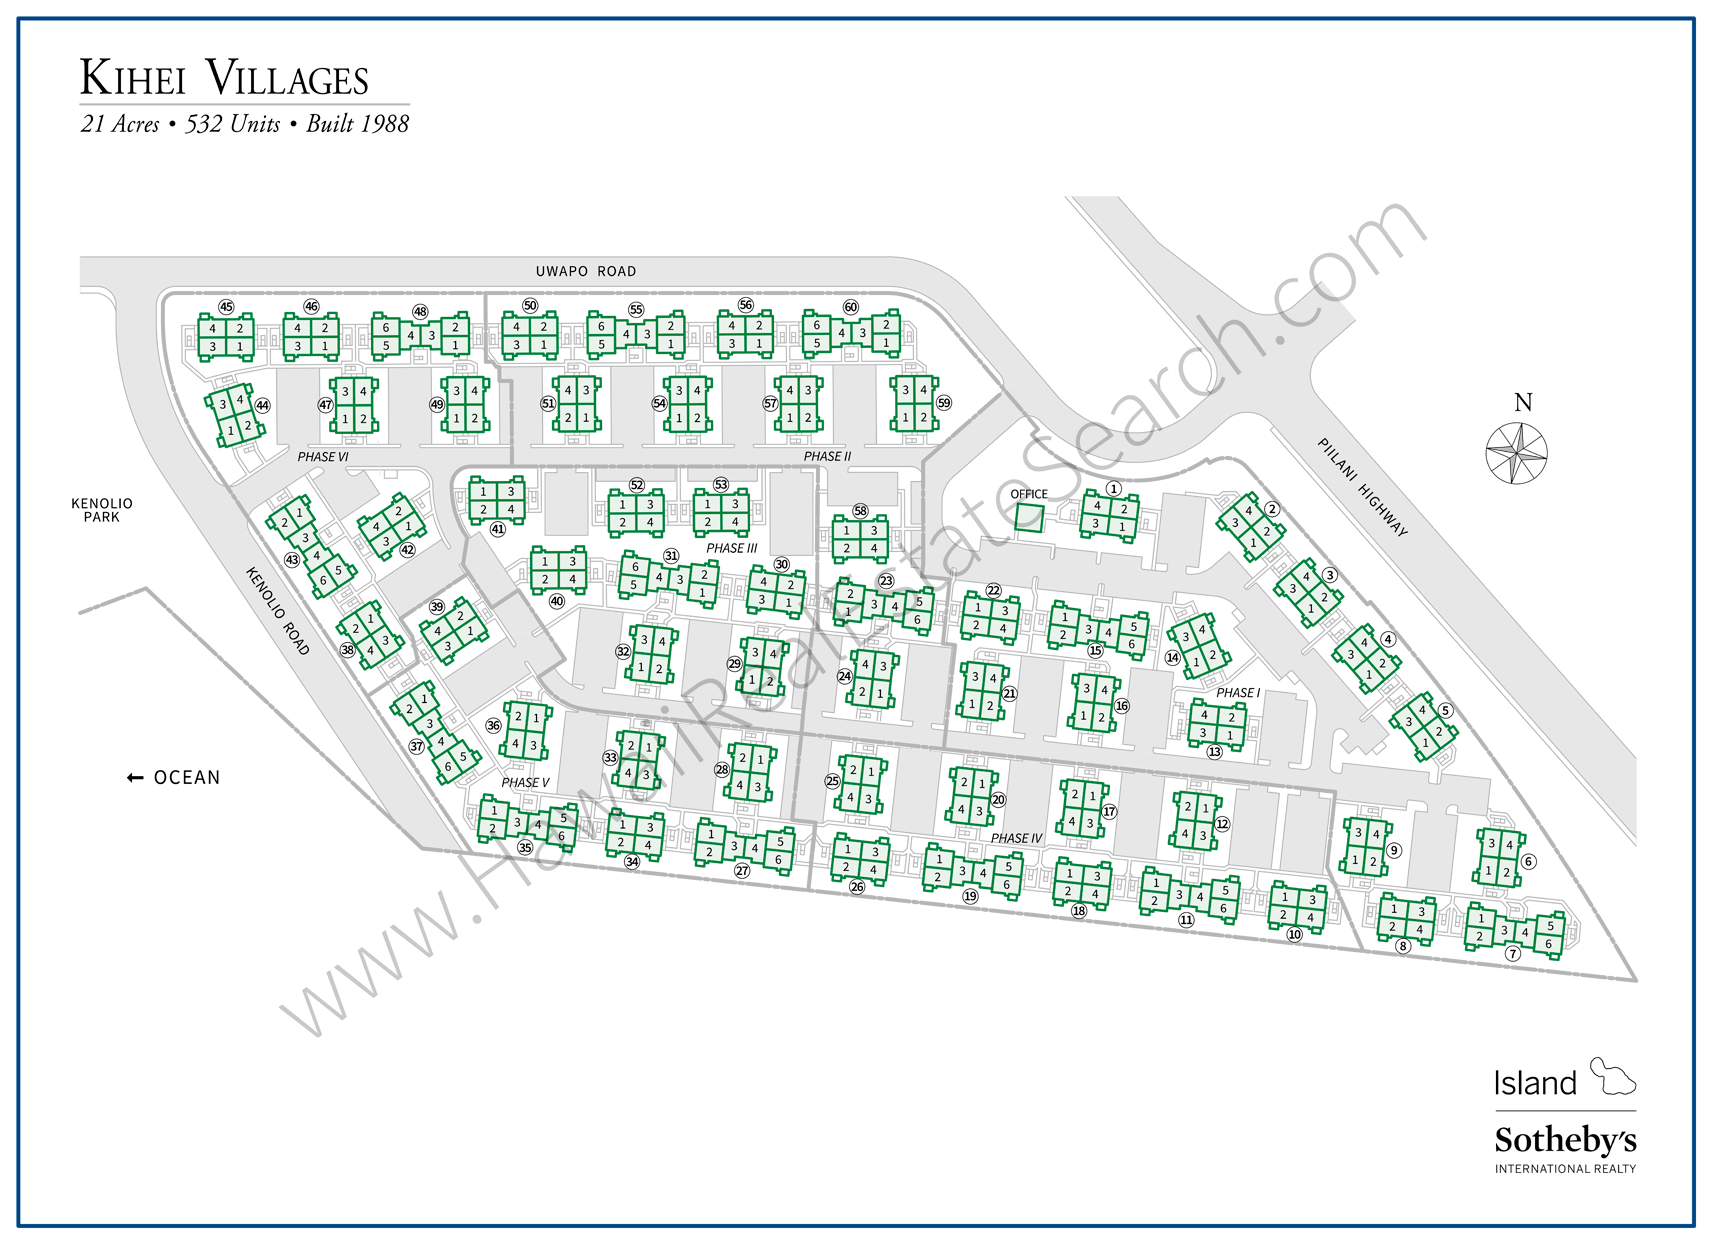 Kihei Villages Property Map Updated